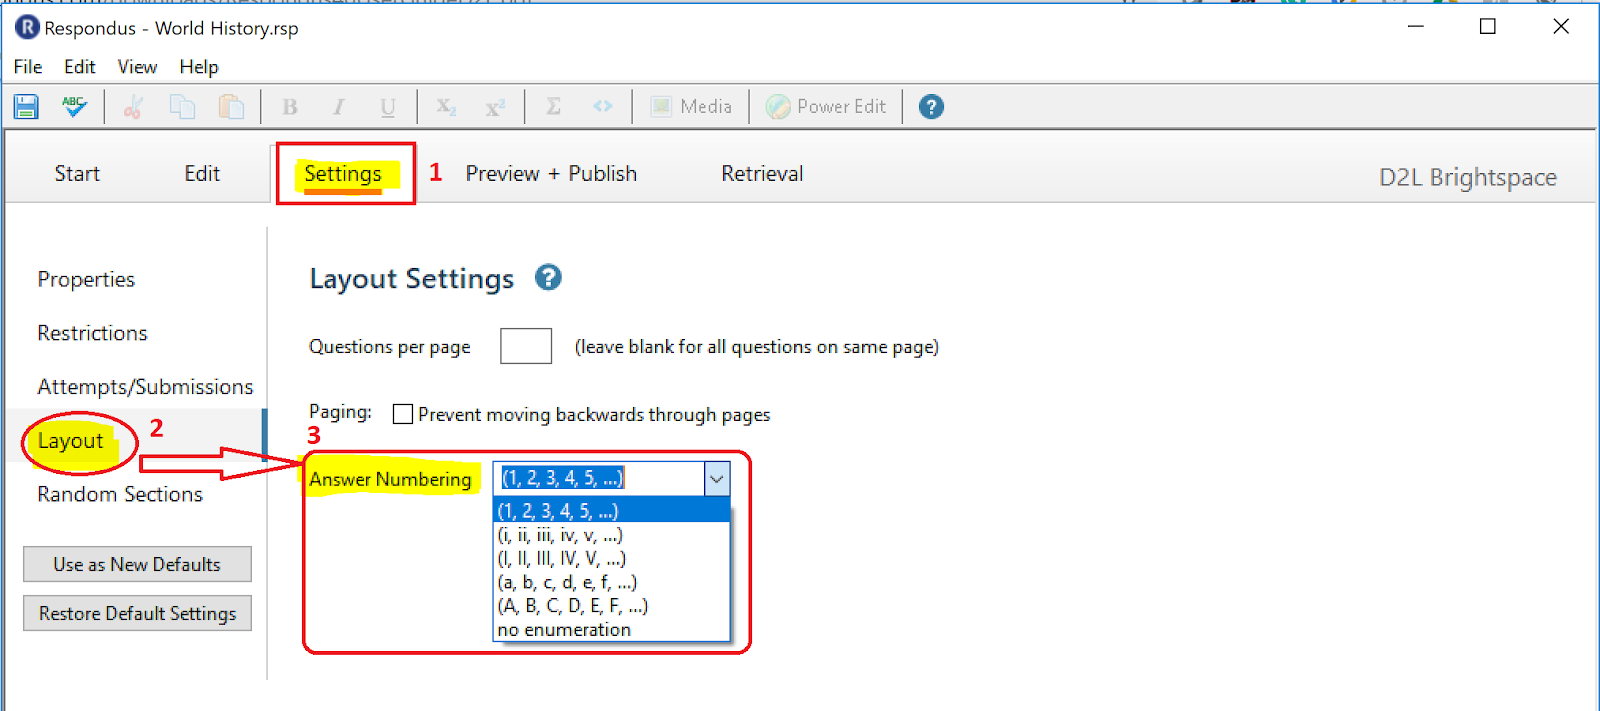 Respondus Settings, Layout, select Answer Numbering